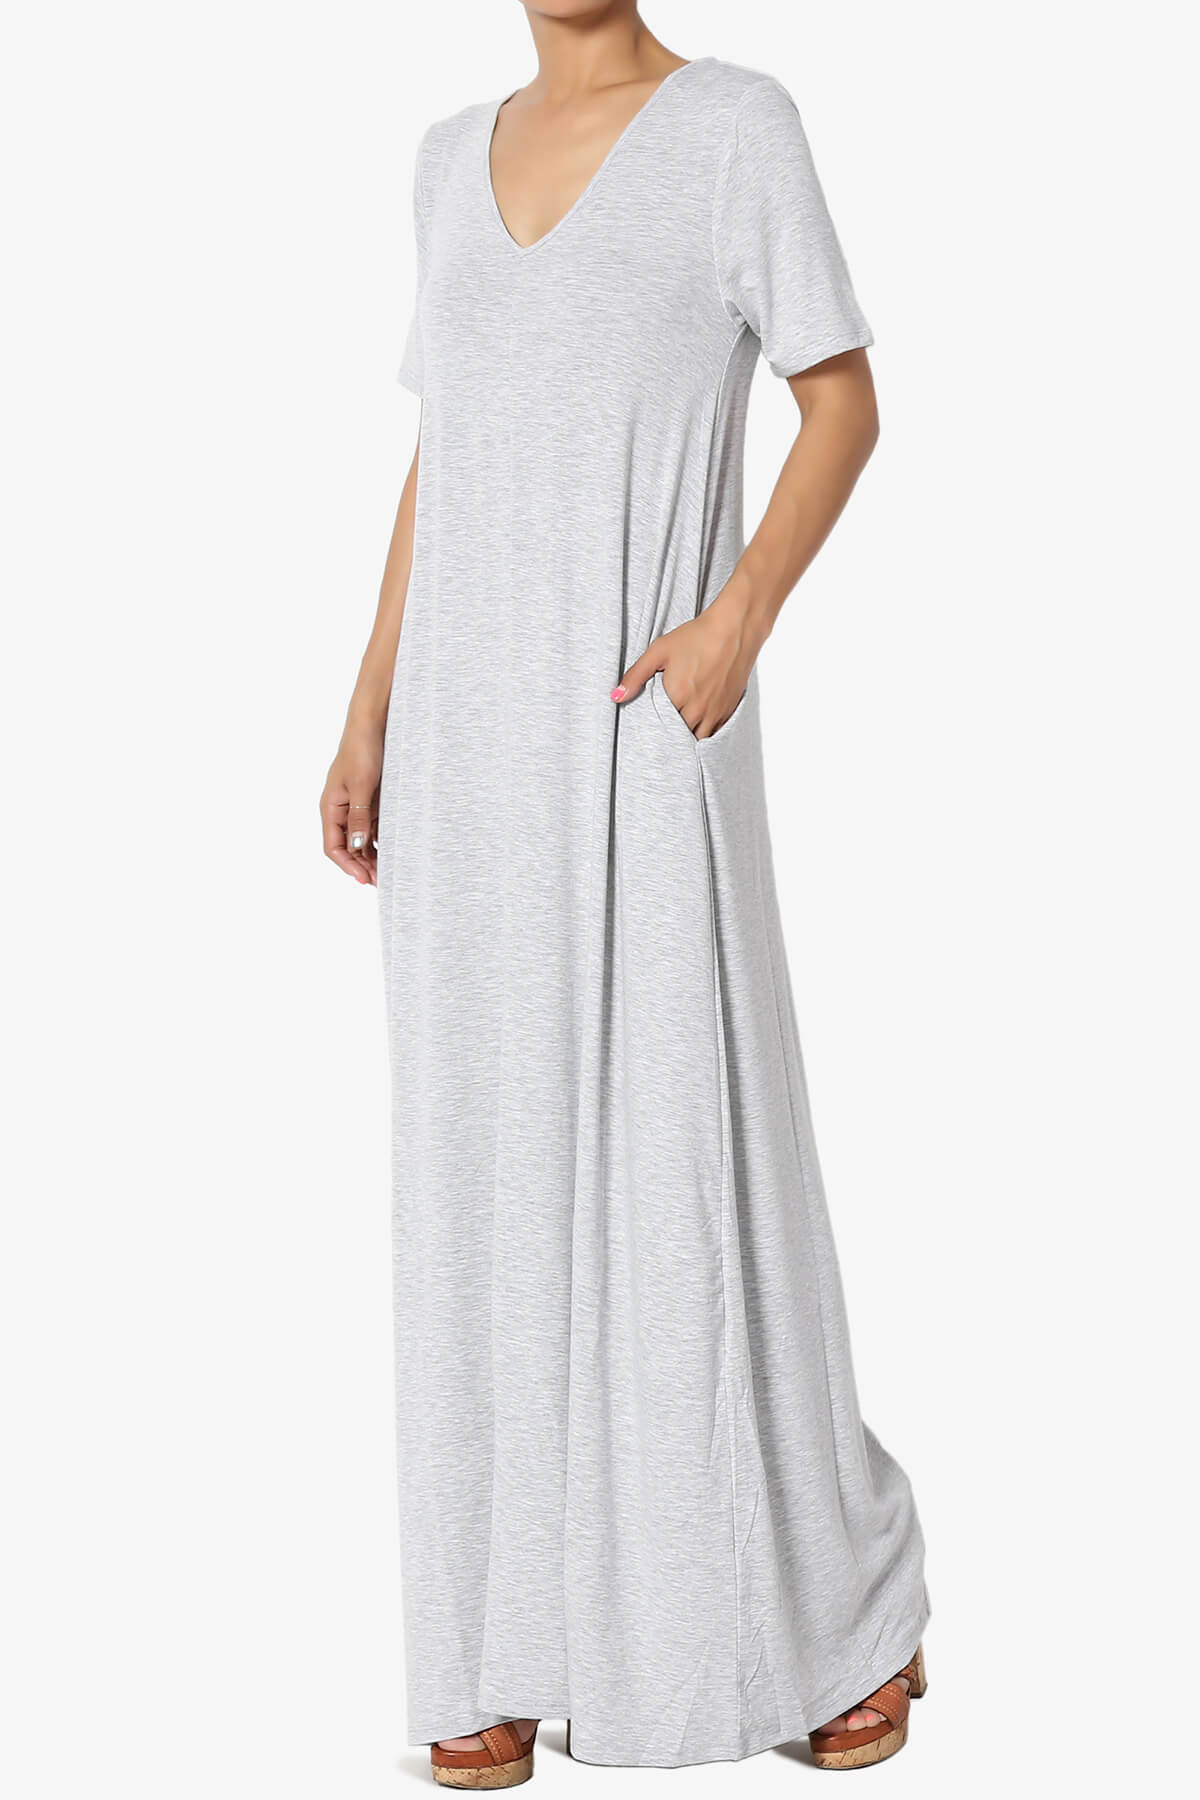 S~3X Casual V-Neck Short Sleeve Loose Fit Long Maxi Dress with Pockets ...